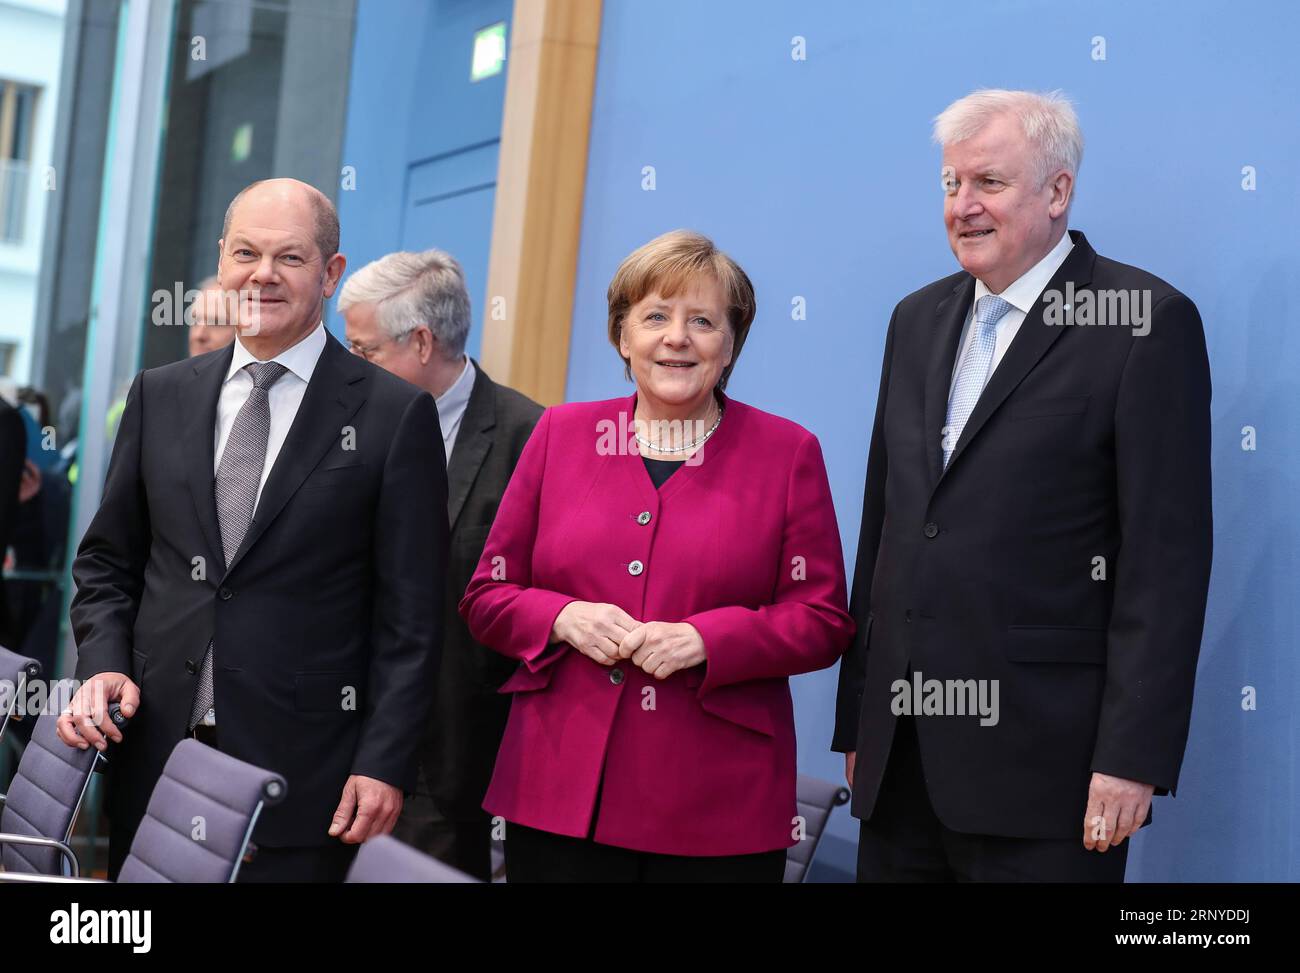 (180312) -- BERLIN, March 12, 2018 -- German Chancellor and Christian Democratic Union (CDU) leader Angela Merkel (C), interim German Social Democrats (SPD) leader Olaf Scholz (L, Front) and Christian Social Union (CSU) leader Horst Seehofer (R) arrive to attend a press conference in Berlin, capital of Germany, on March 12, 2018. The leaders of the Christian Democratic Union (CDU), Christian Social Union (CSU) and German Social Democrats (SPD) revealed the key priorities of Germany s new federal government on Monday. ) GERMANY-BERLIN-GRAND COALITION-AGREEMENT ShanxYuqi PUBLICATIONxNOTxINxCHN Stock Photo